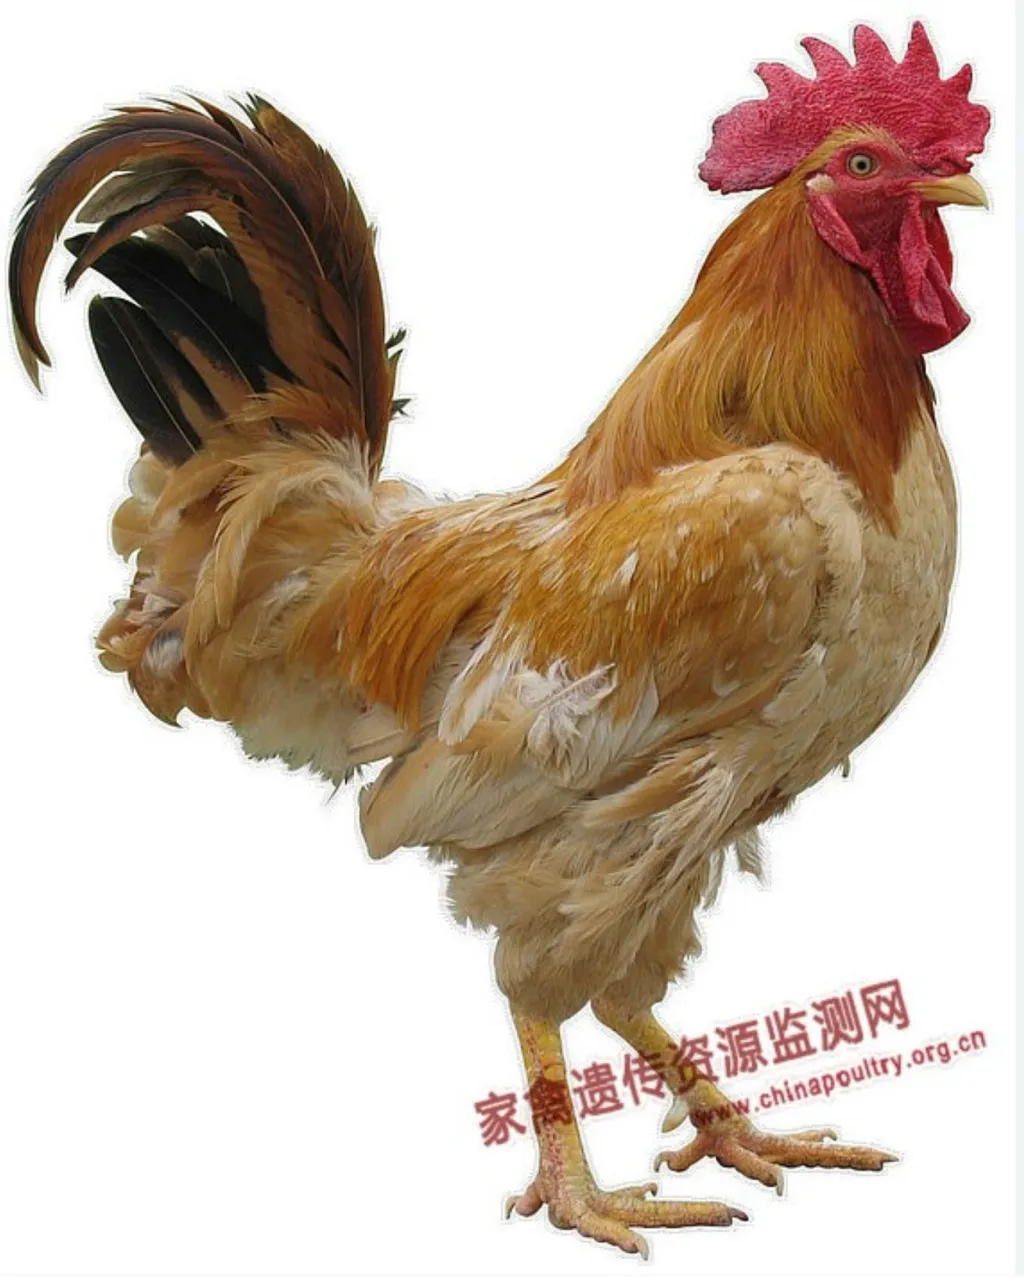 A male Zhenyang "3 Yellows" chicken. Yellow feet, flanks & beak, whilst it has a bright red comb.